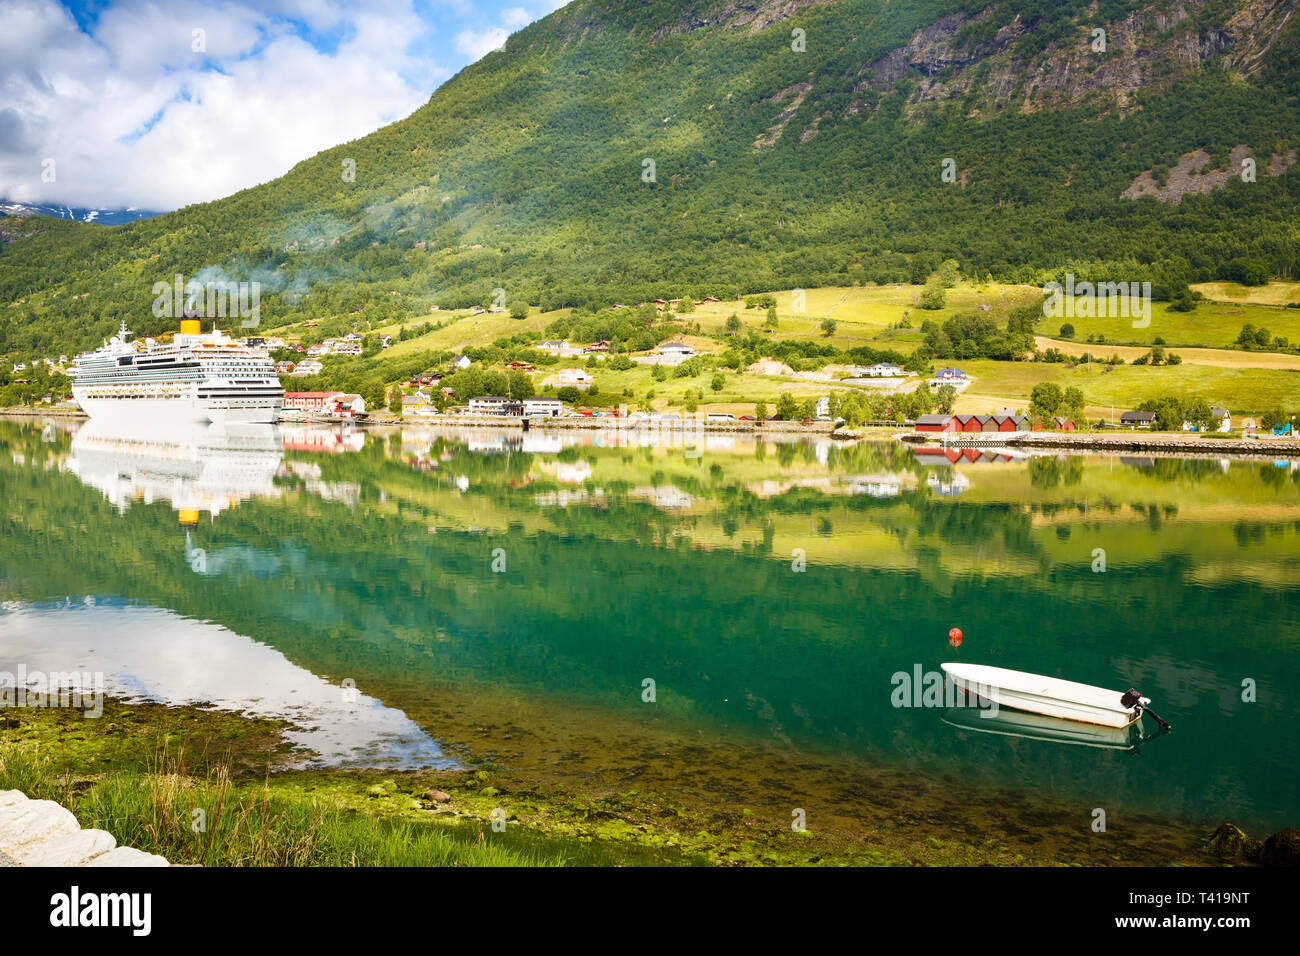 Landscape with mountains, cruise liner, village and fjord in Norway. Stock Photo